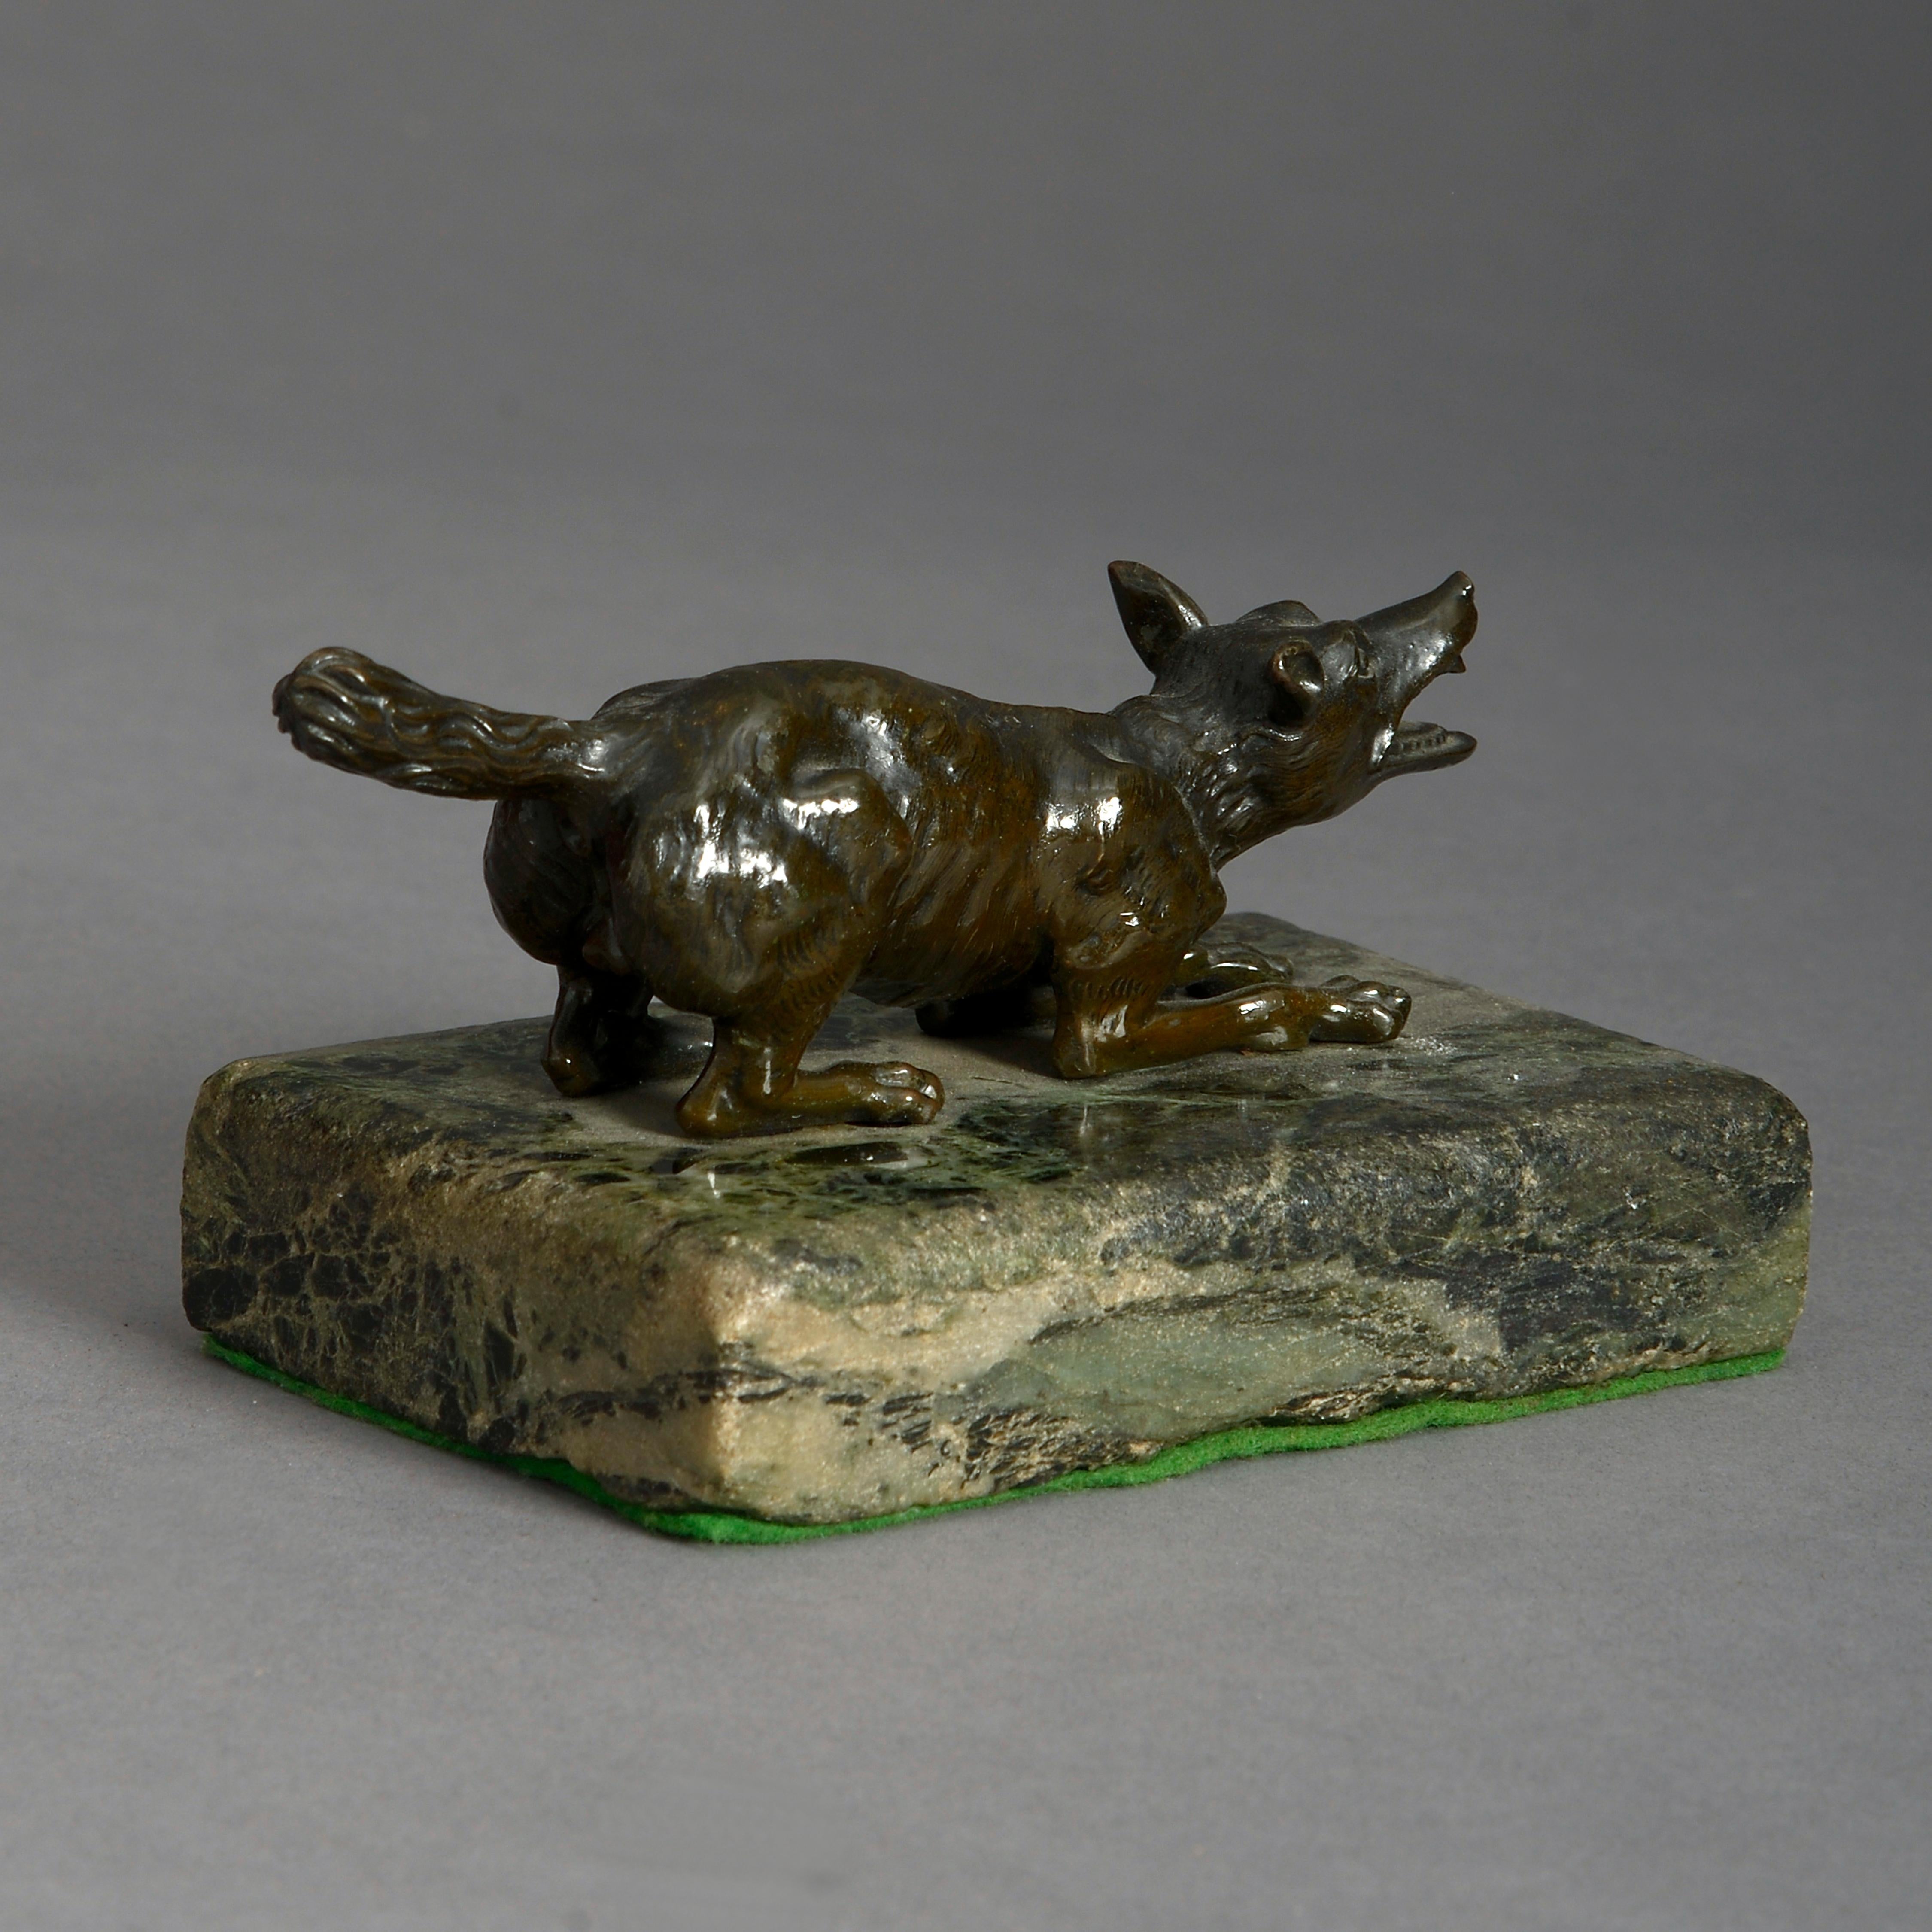 A mid-19th century bronze sculpture of a wolf, set upon a green marble plinth.